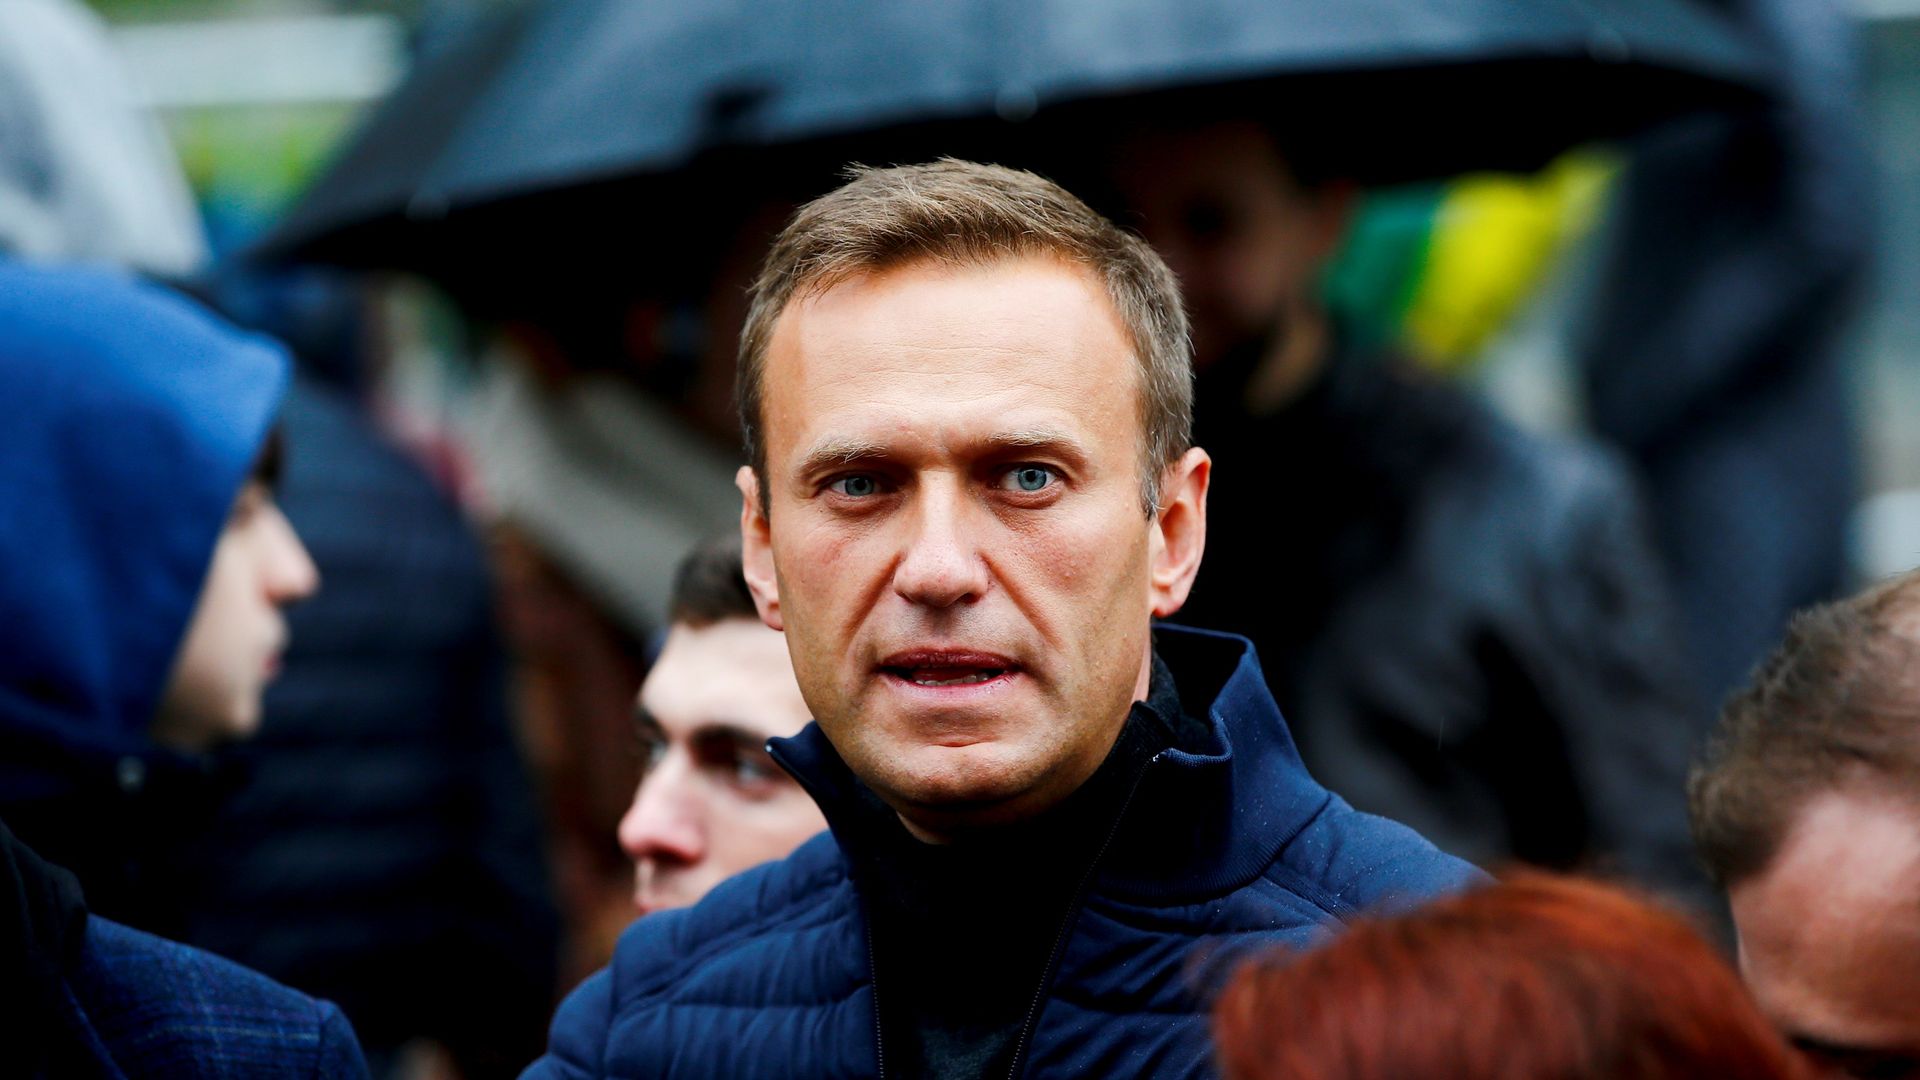 Russian opposition leader Alexei Navalny during a rally in Moscow, Russia, in September 2019.